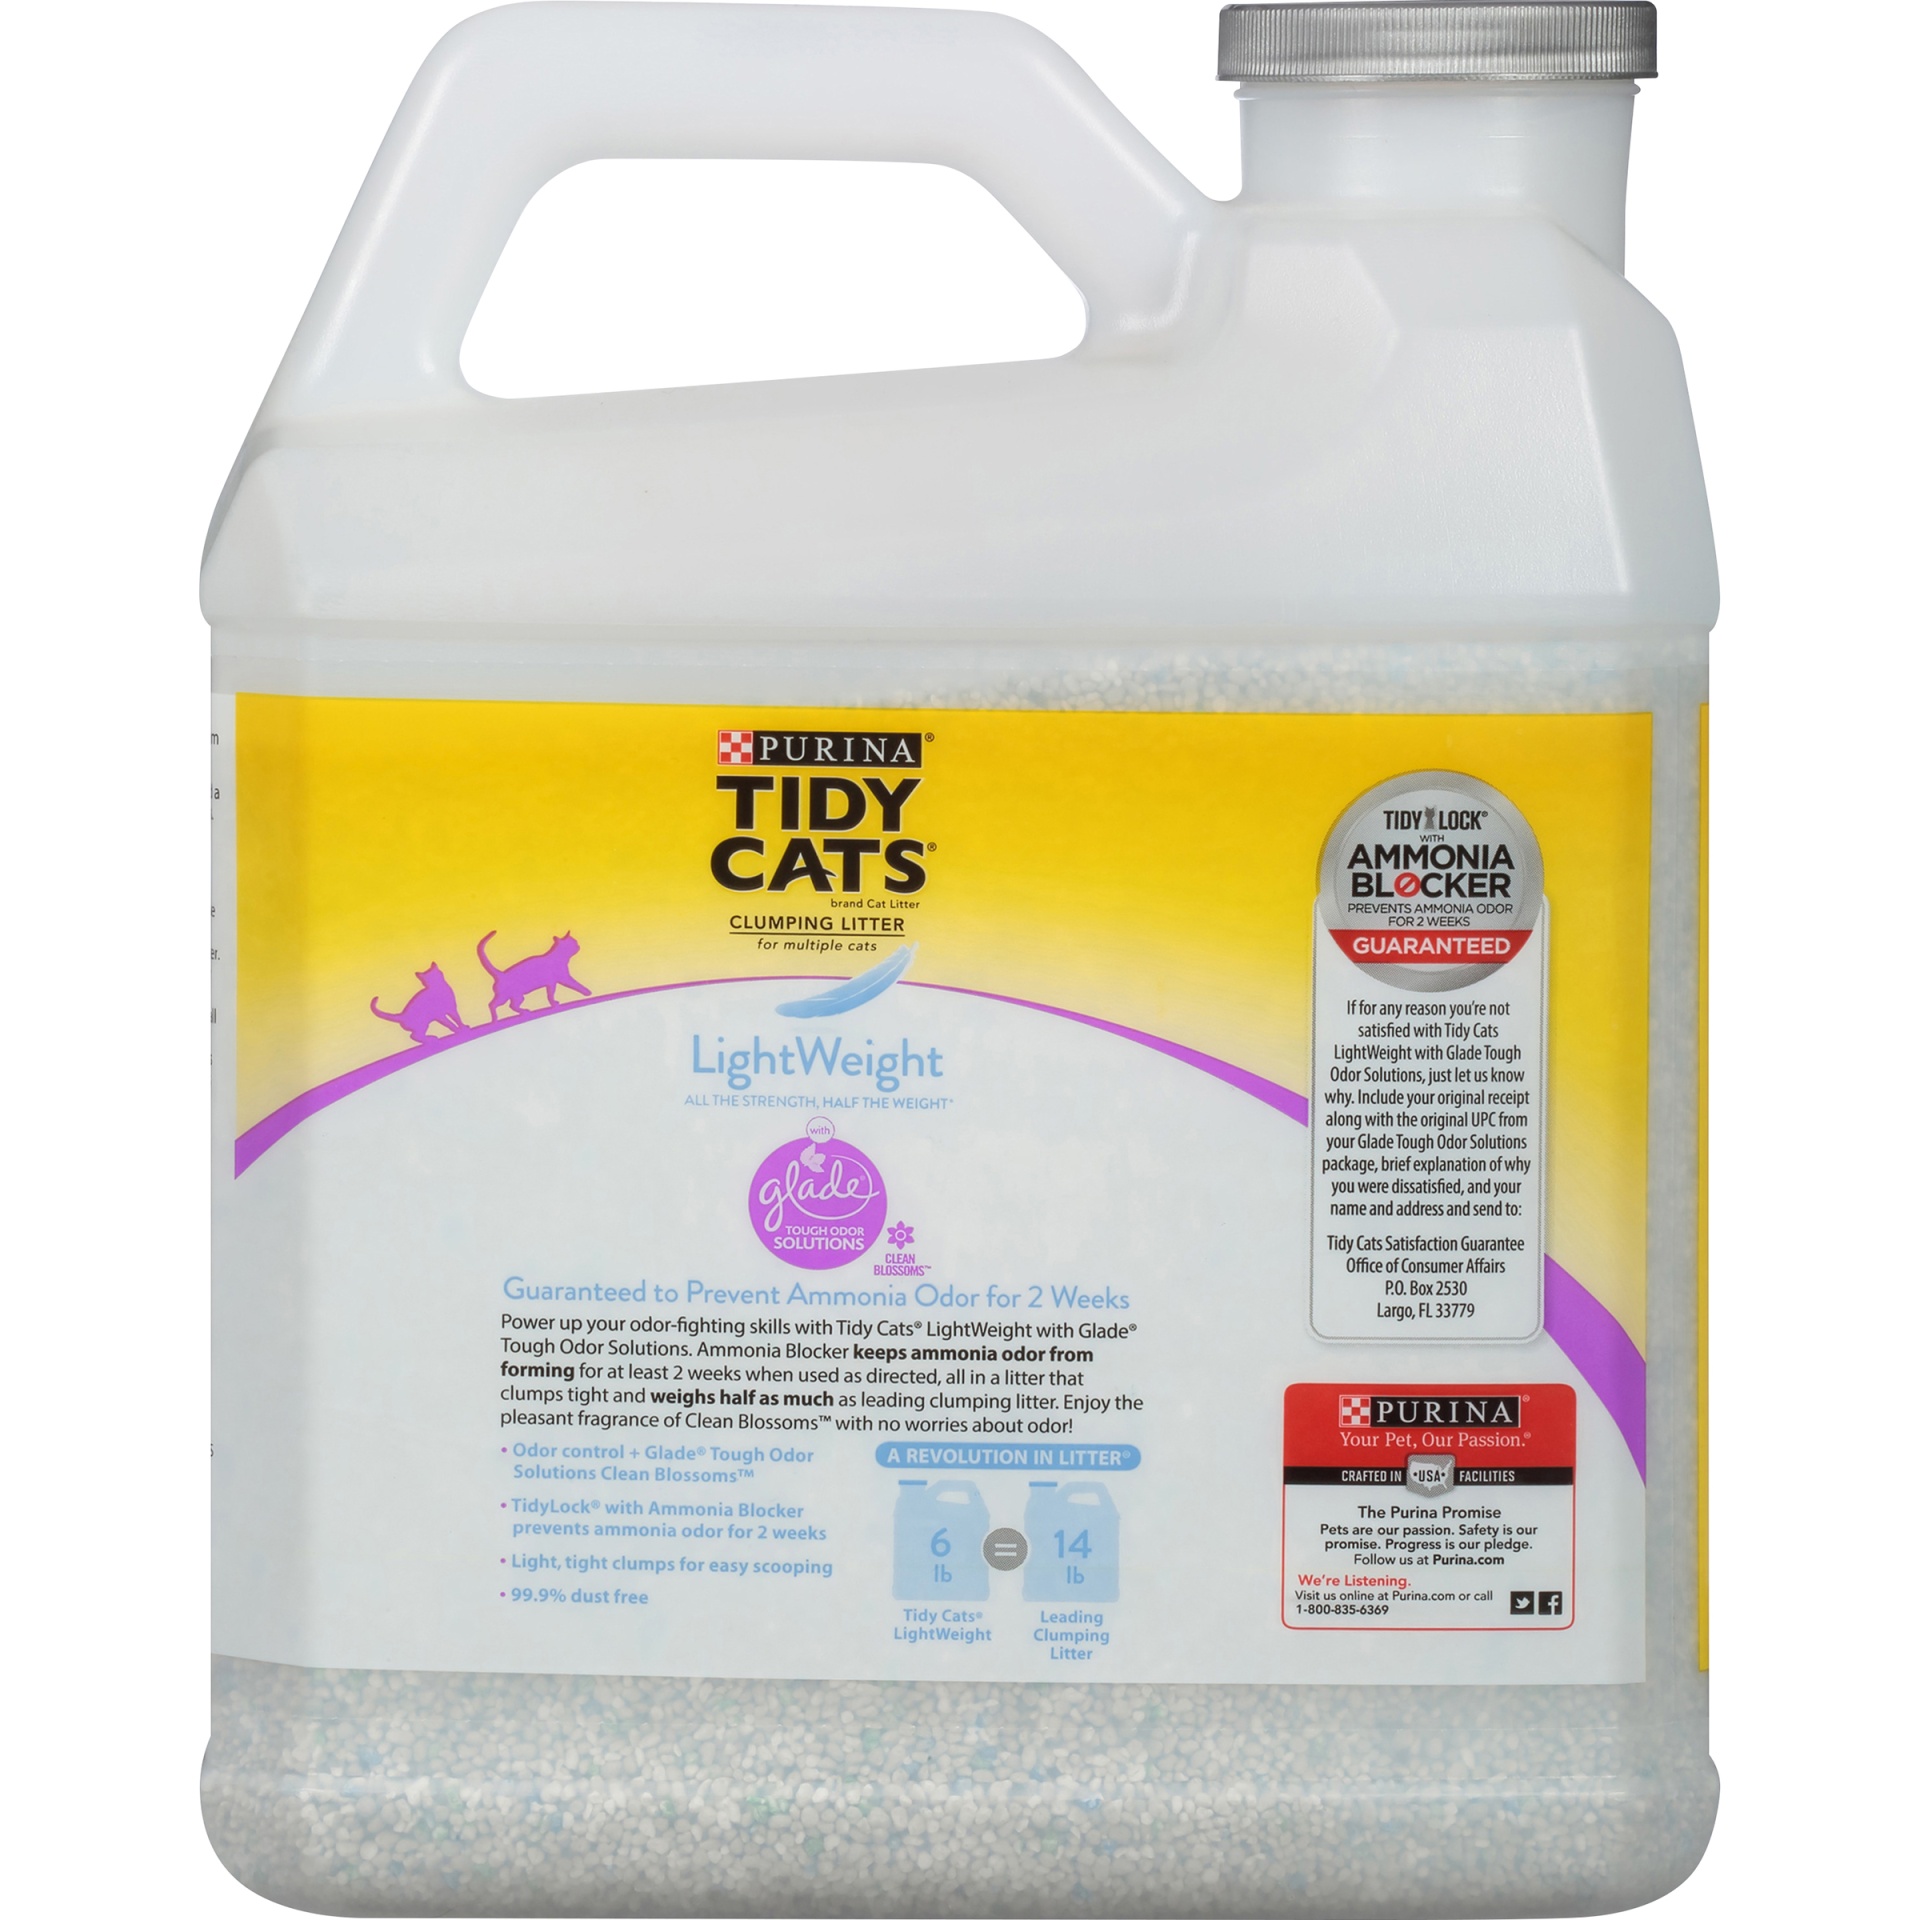 Purina Tidy Cats LightWeight Clean Blossoms Clumping Cat Litter with